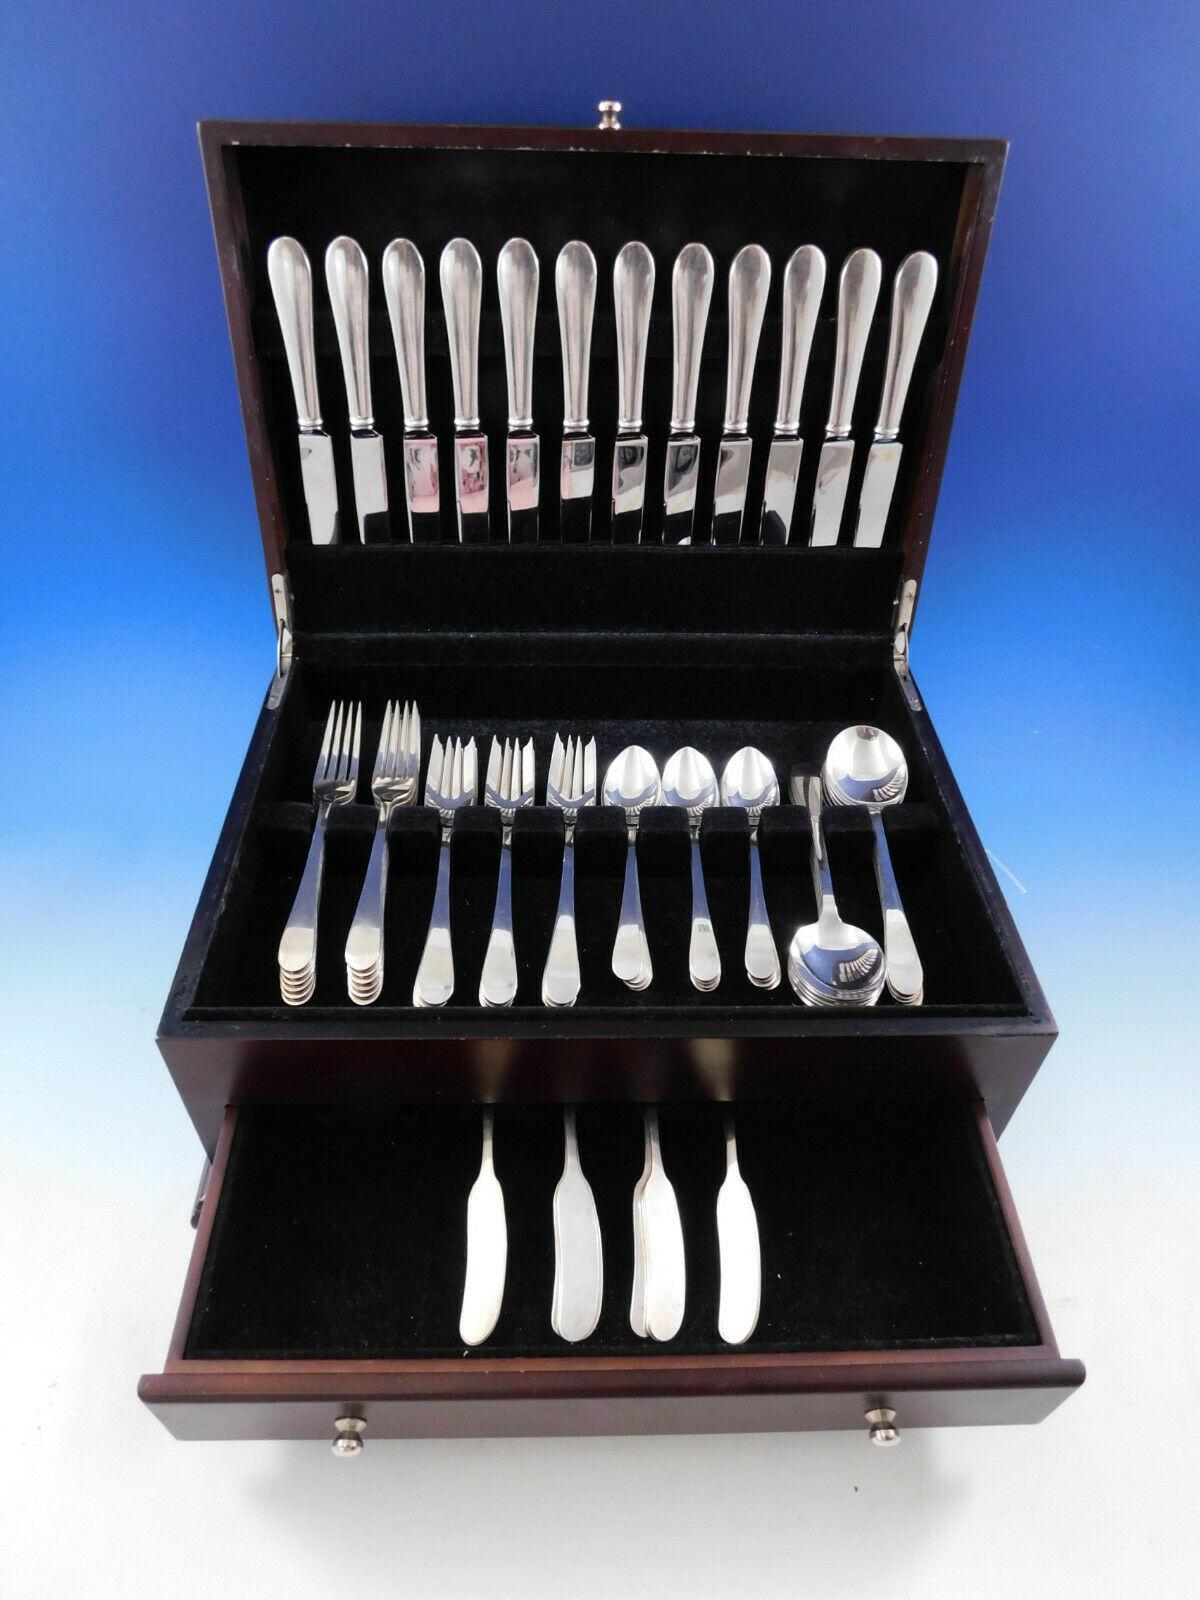 Salem by Tiffany & Co. sterling silver flatware set - 72 pieces. This set includes:

12 regular knives, 8 5/8